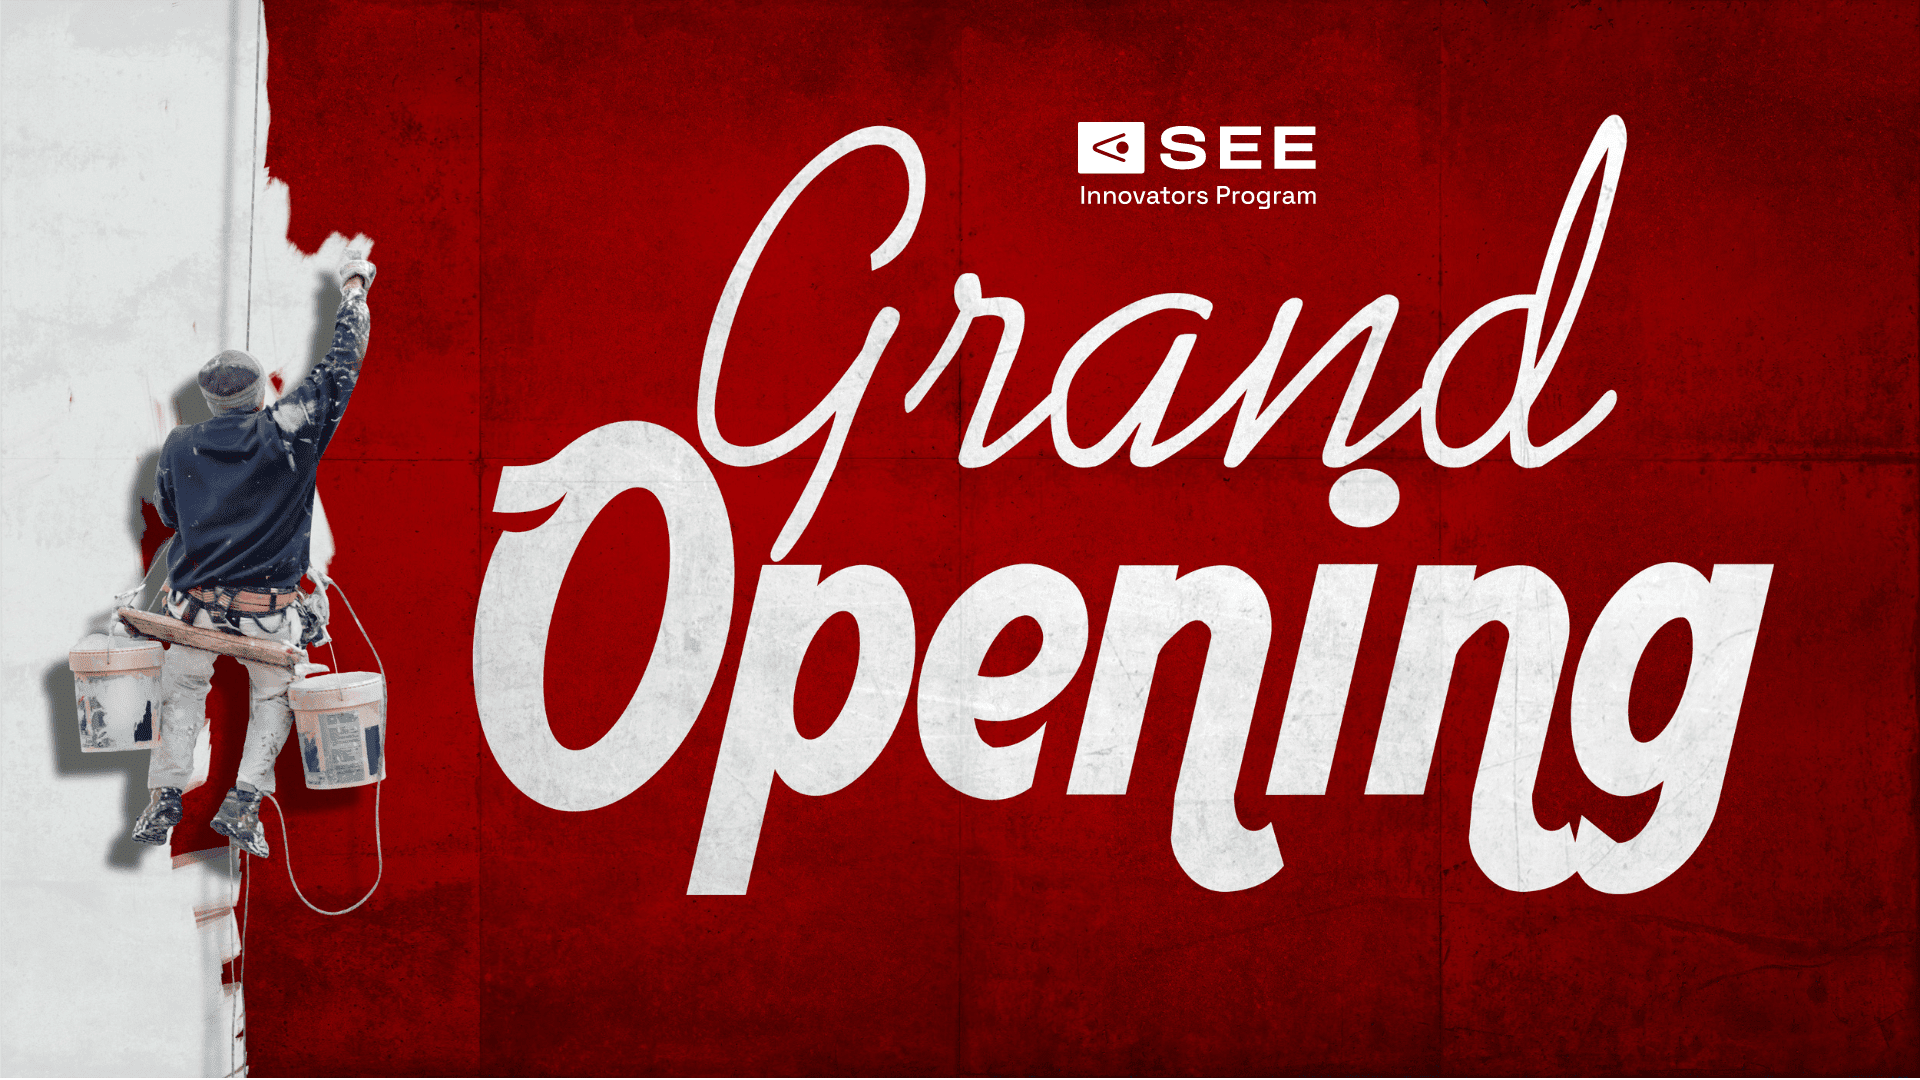 see grand opening